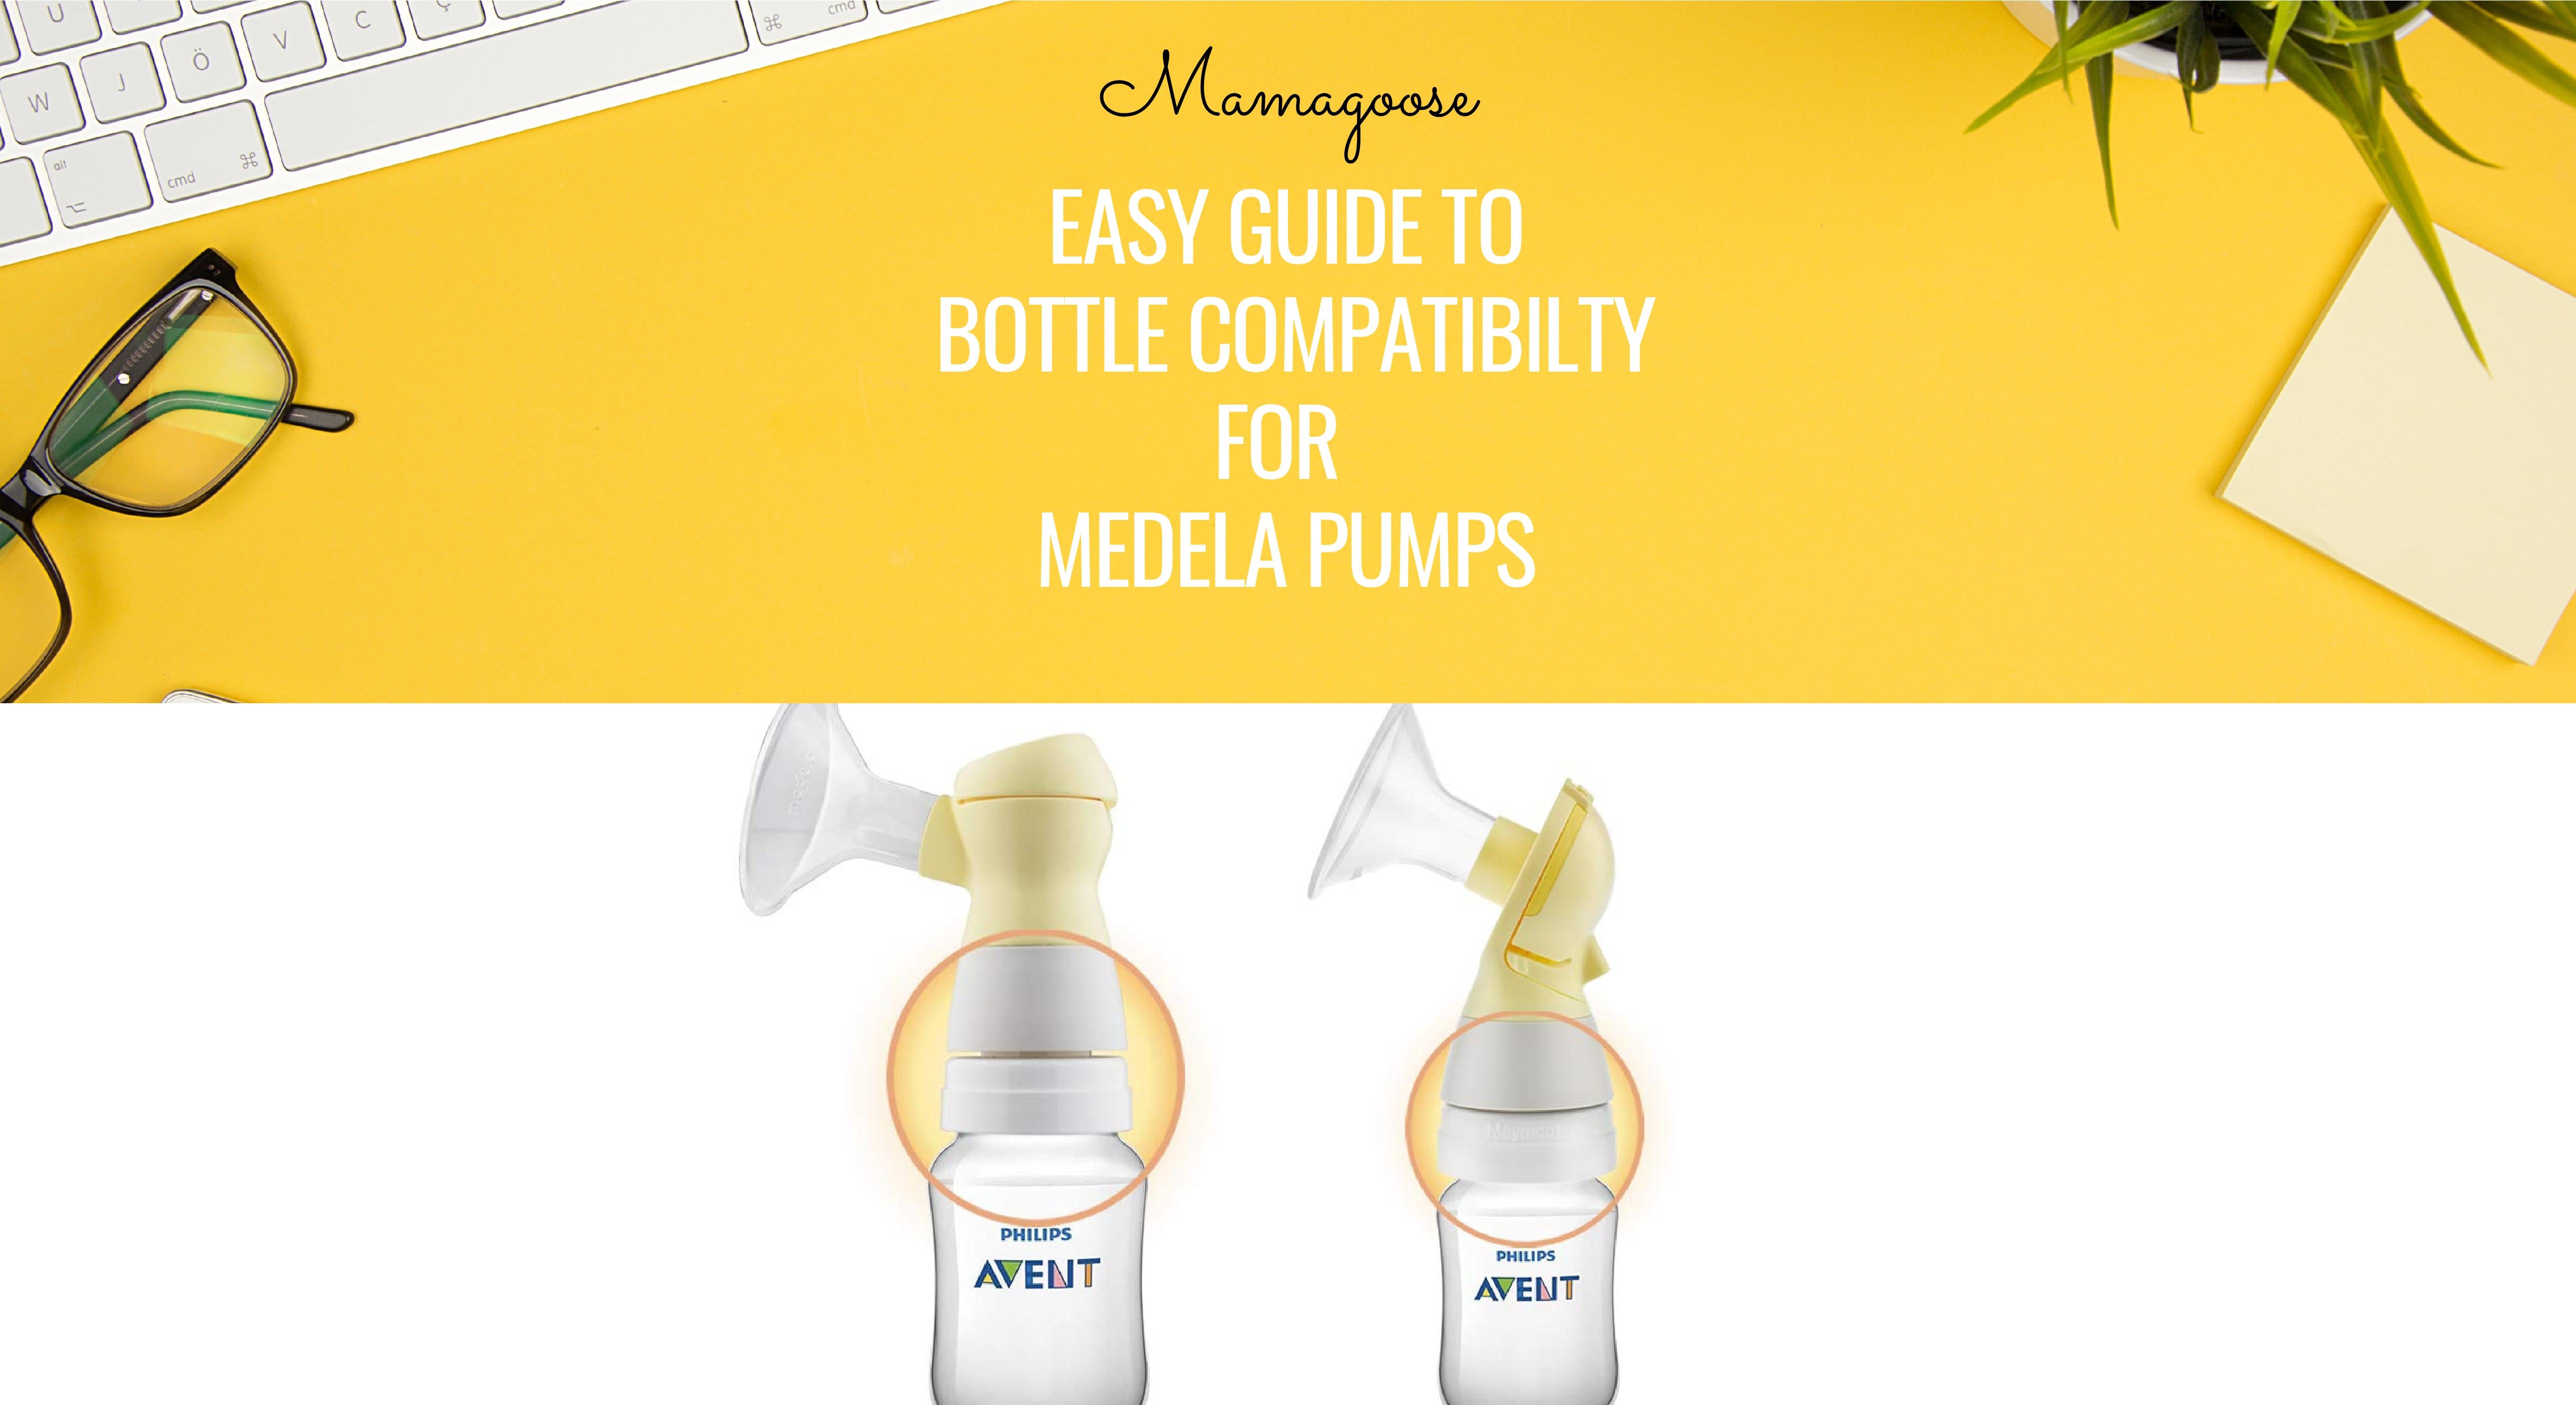 Freestyle Flex Pump to Use with Phillips Avent Classic Bottles Avent Natural PP Bottle Spectra Wide-mouth Bottle Thread Changer Avent Converter Kit Maymom Conversion Kit Compatible with Medela Sonata